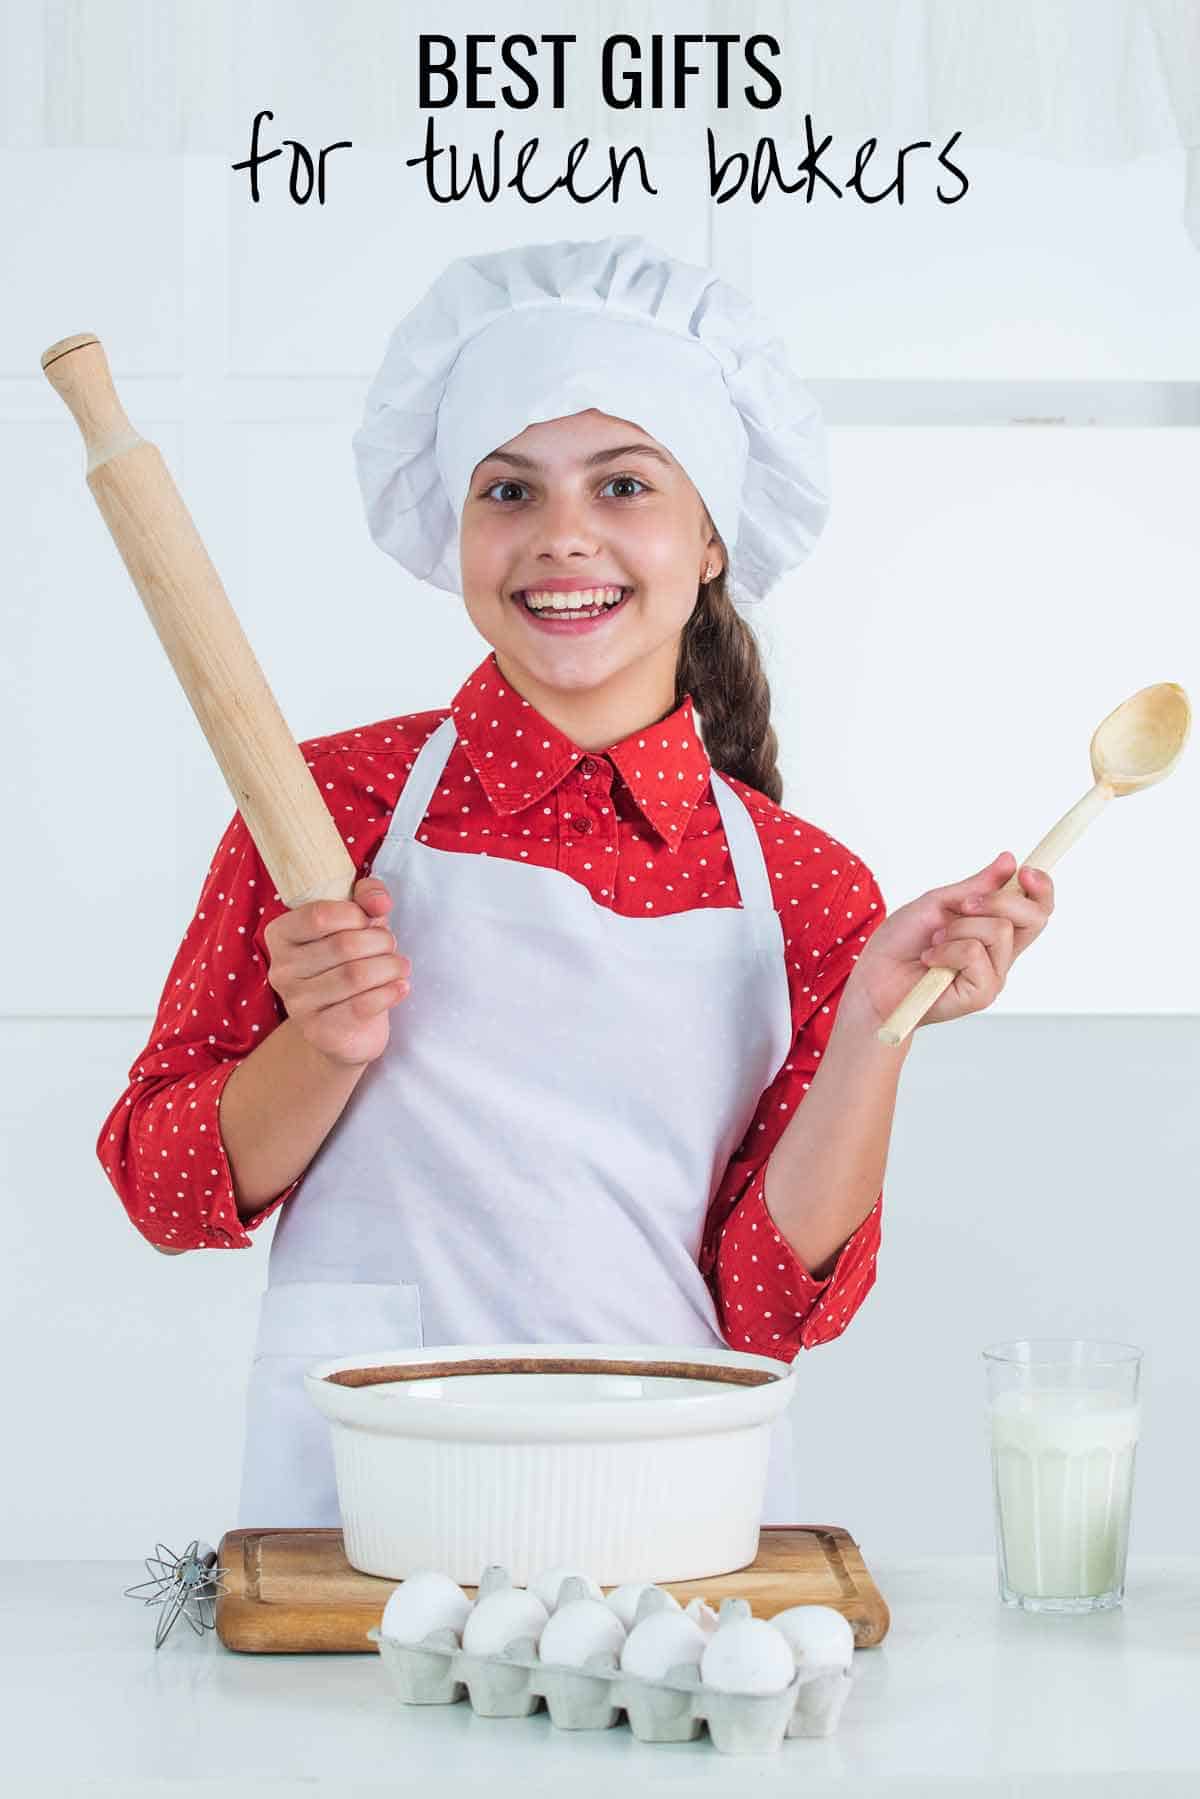 Tween girl with chef hat and apron holding a wooden spoon and rolling pin.